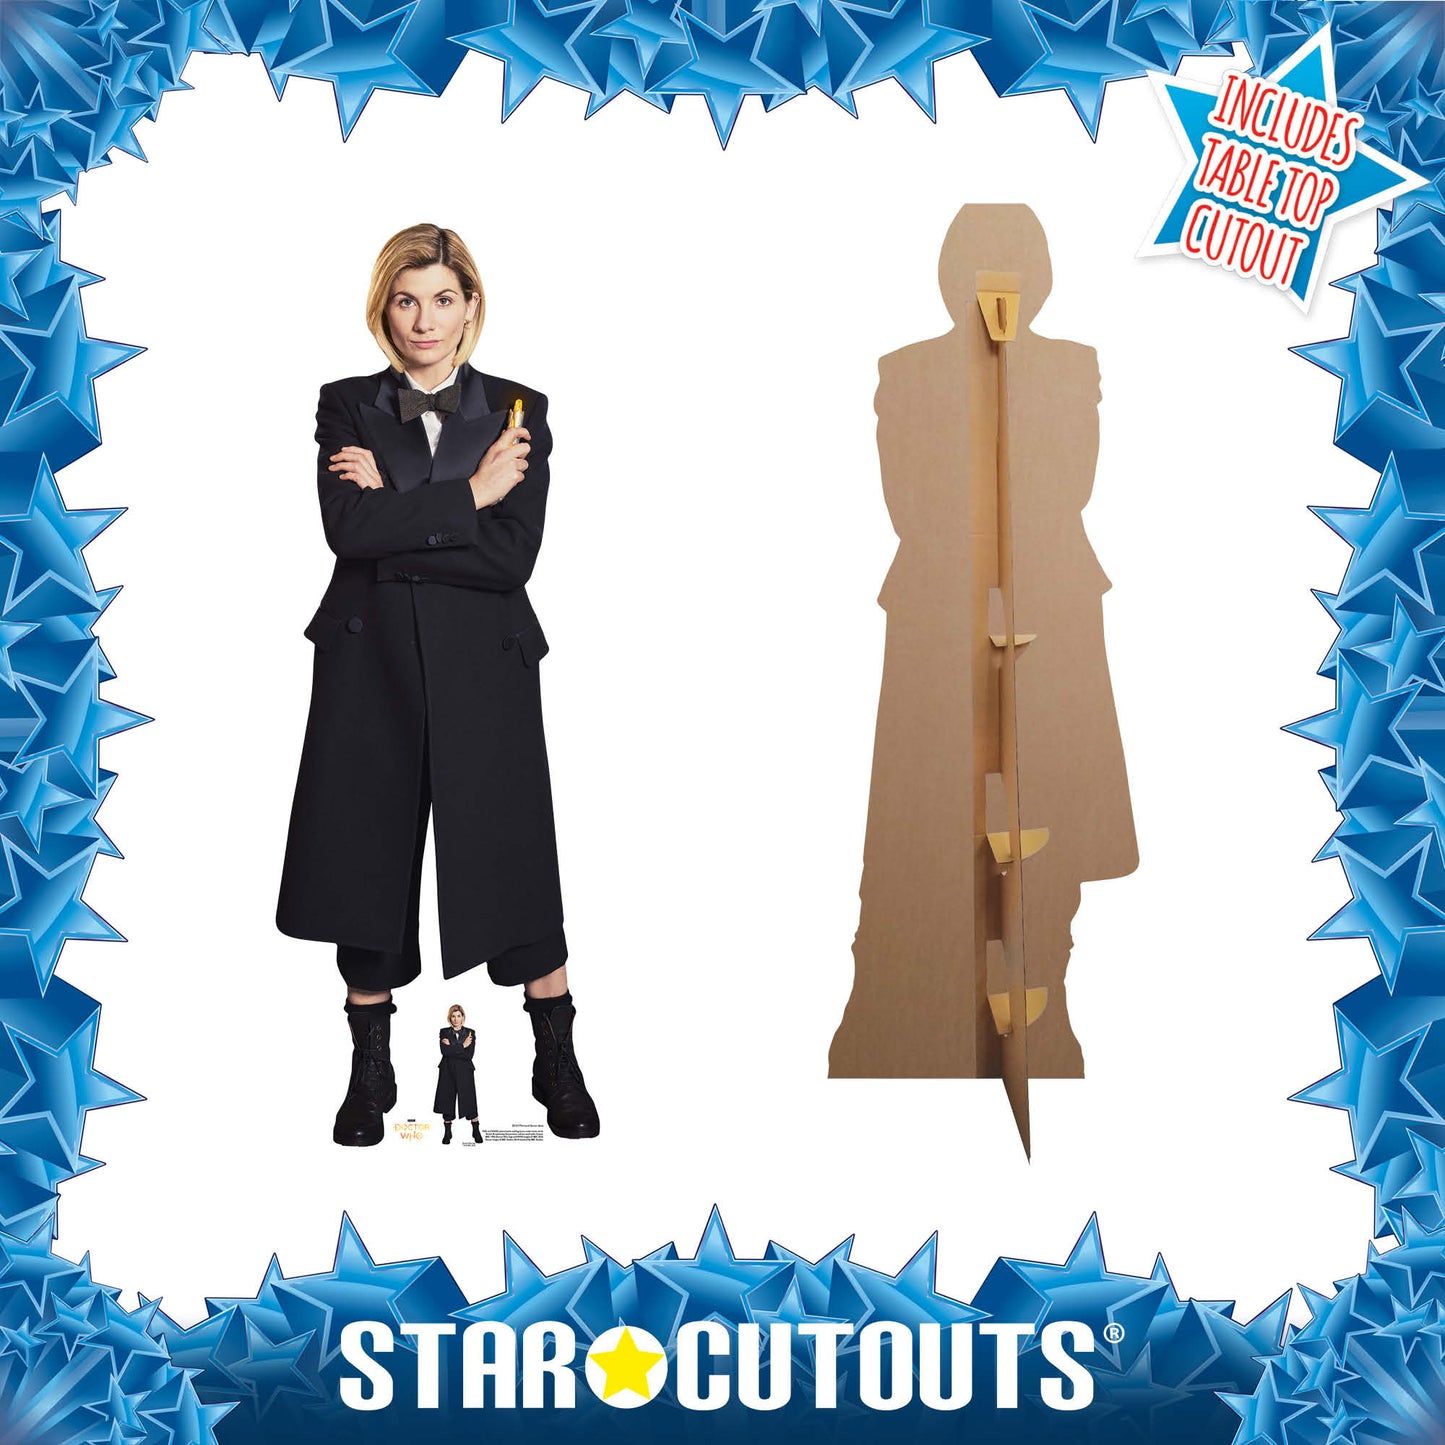 13th Doctor Who Jodie Whittaker Spyfall Suit Cardboard Cut Out Height 167cm - Star Cutouts